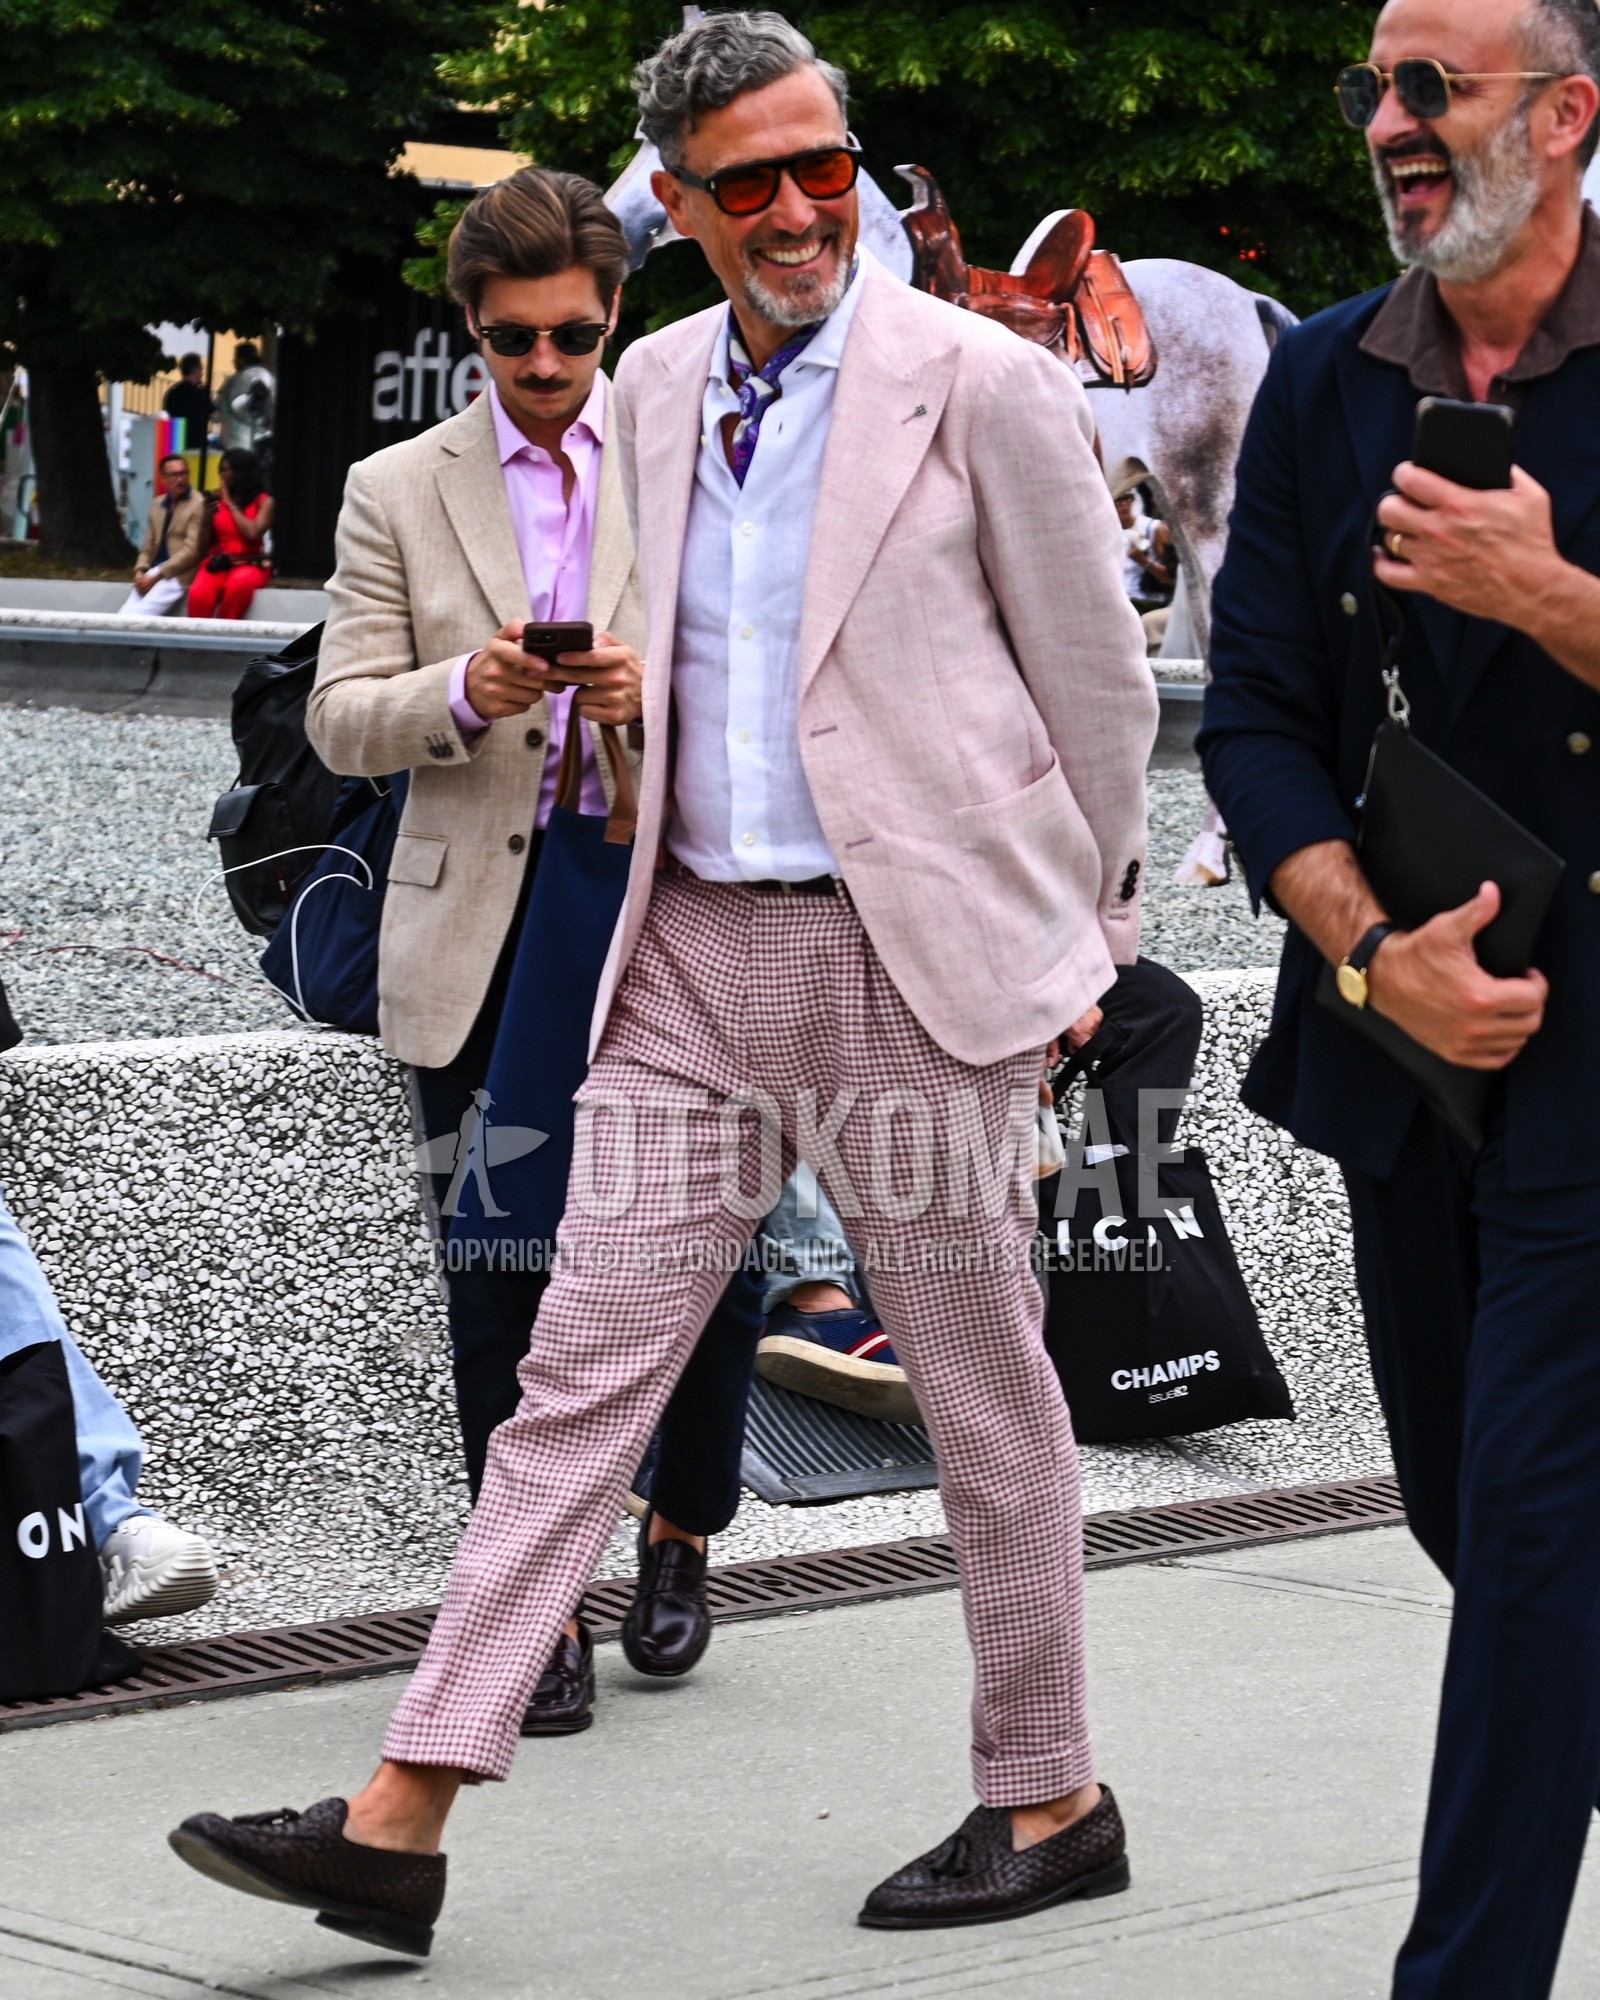 Men's spring summer autumn outfit with red plain sunglasses, purple plain bandana/neckerchief, pink plain tailored jacket, white plain shirt, brown plain leather belt, pink check pleated pants, brown tassel loafers leather shoes.